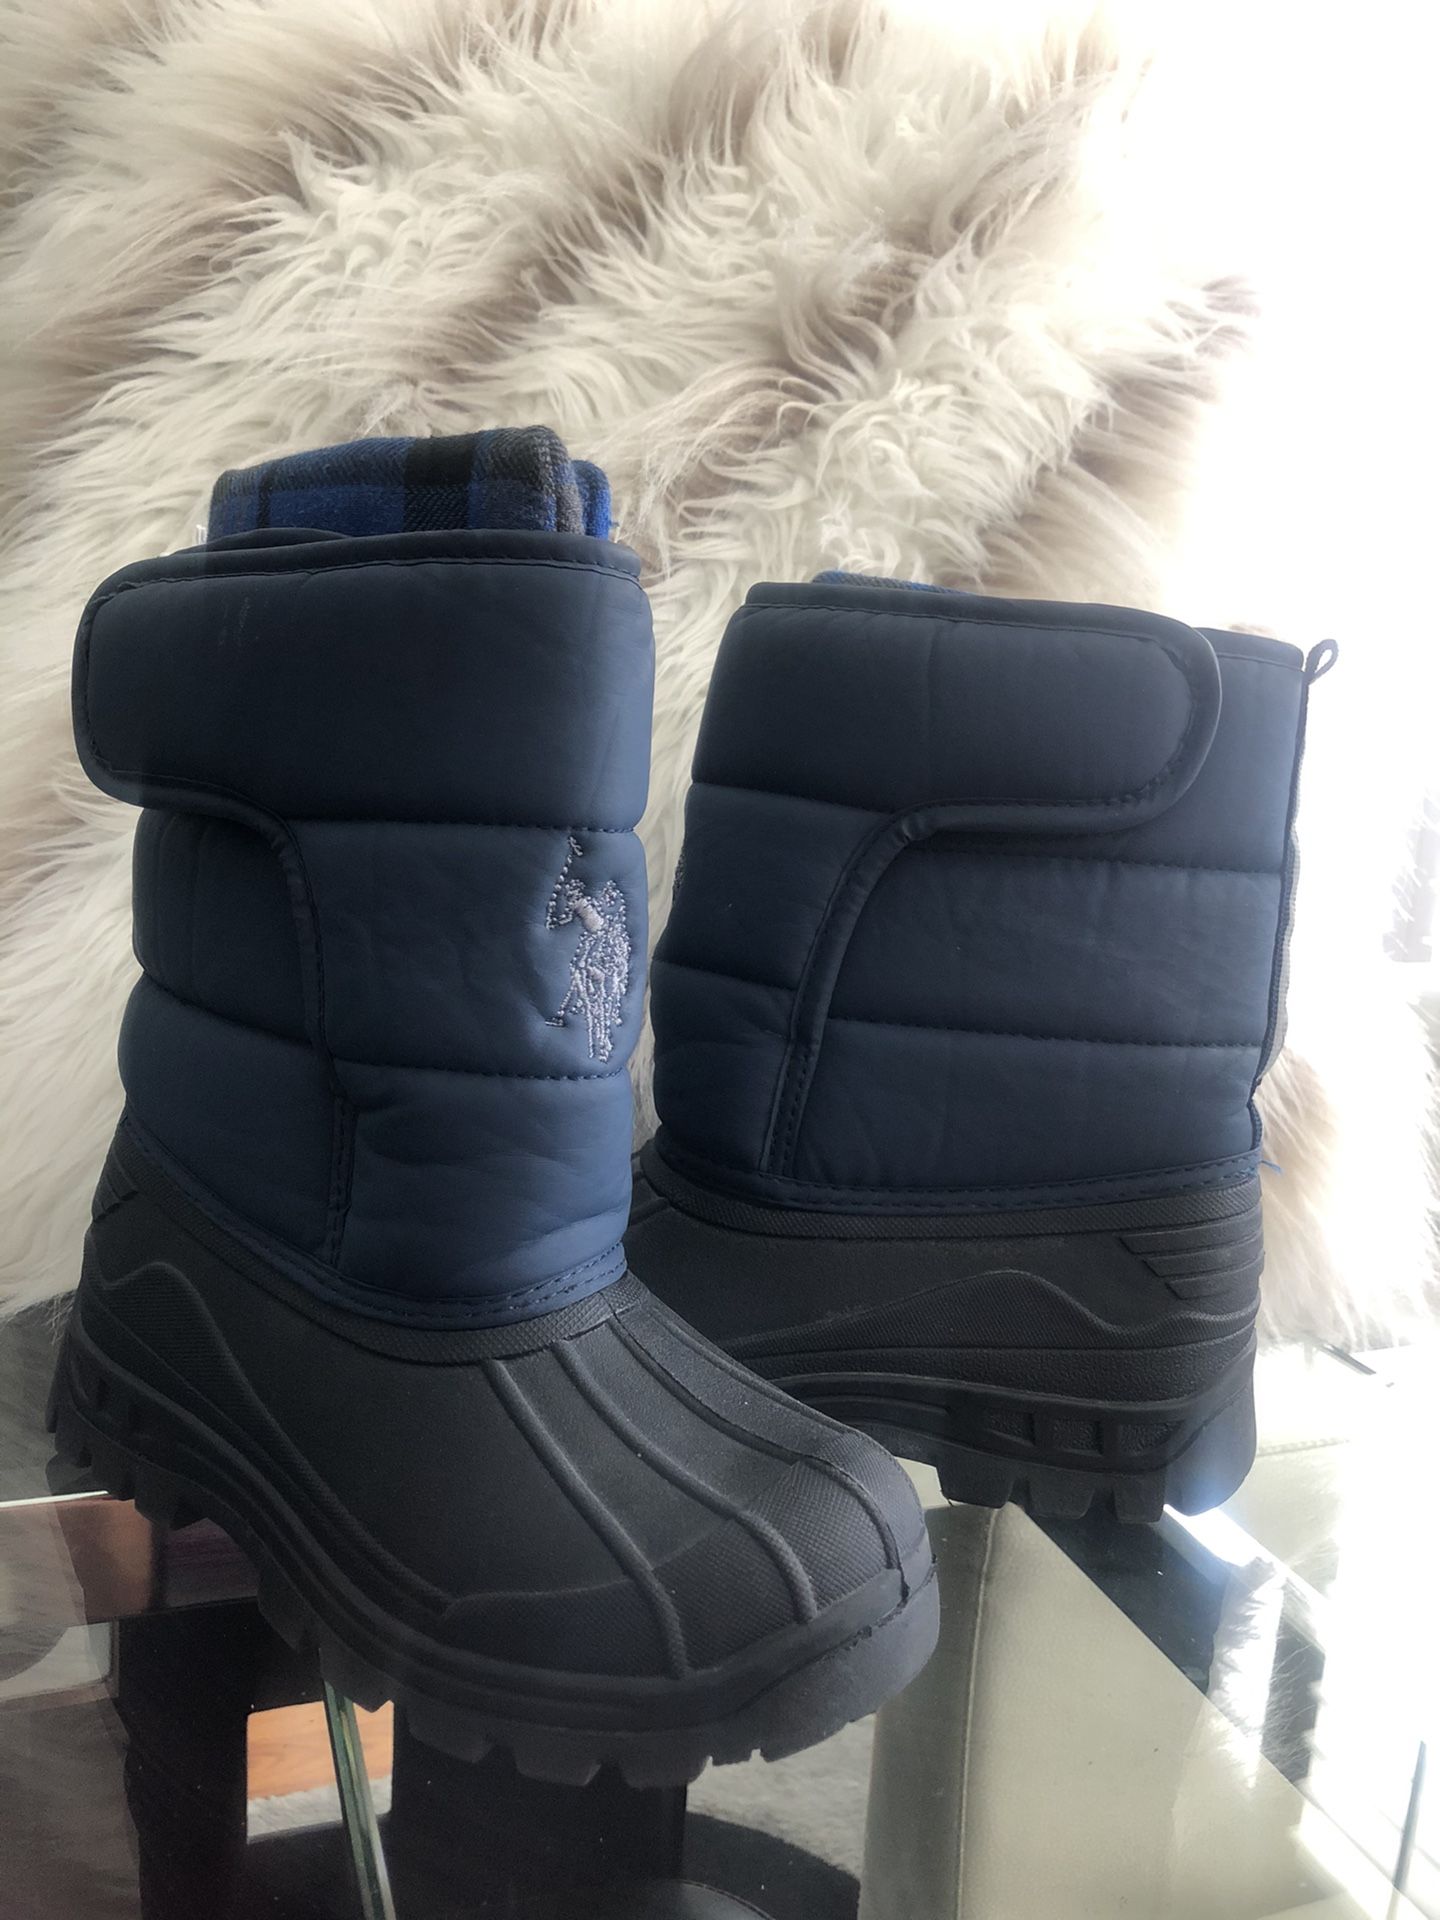 Snow boots for kids all sizes